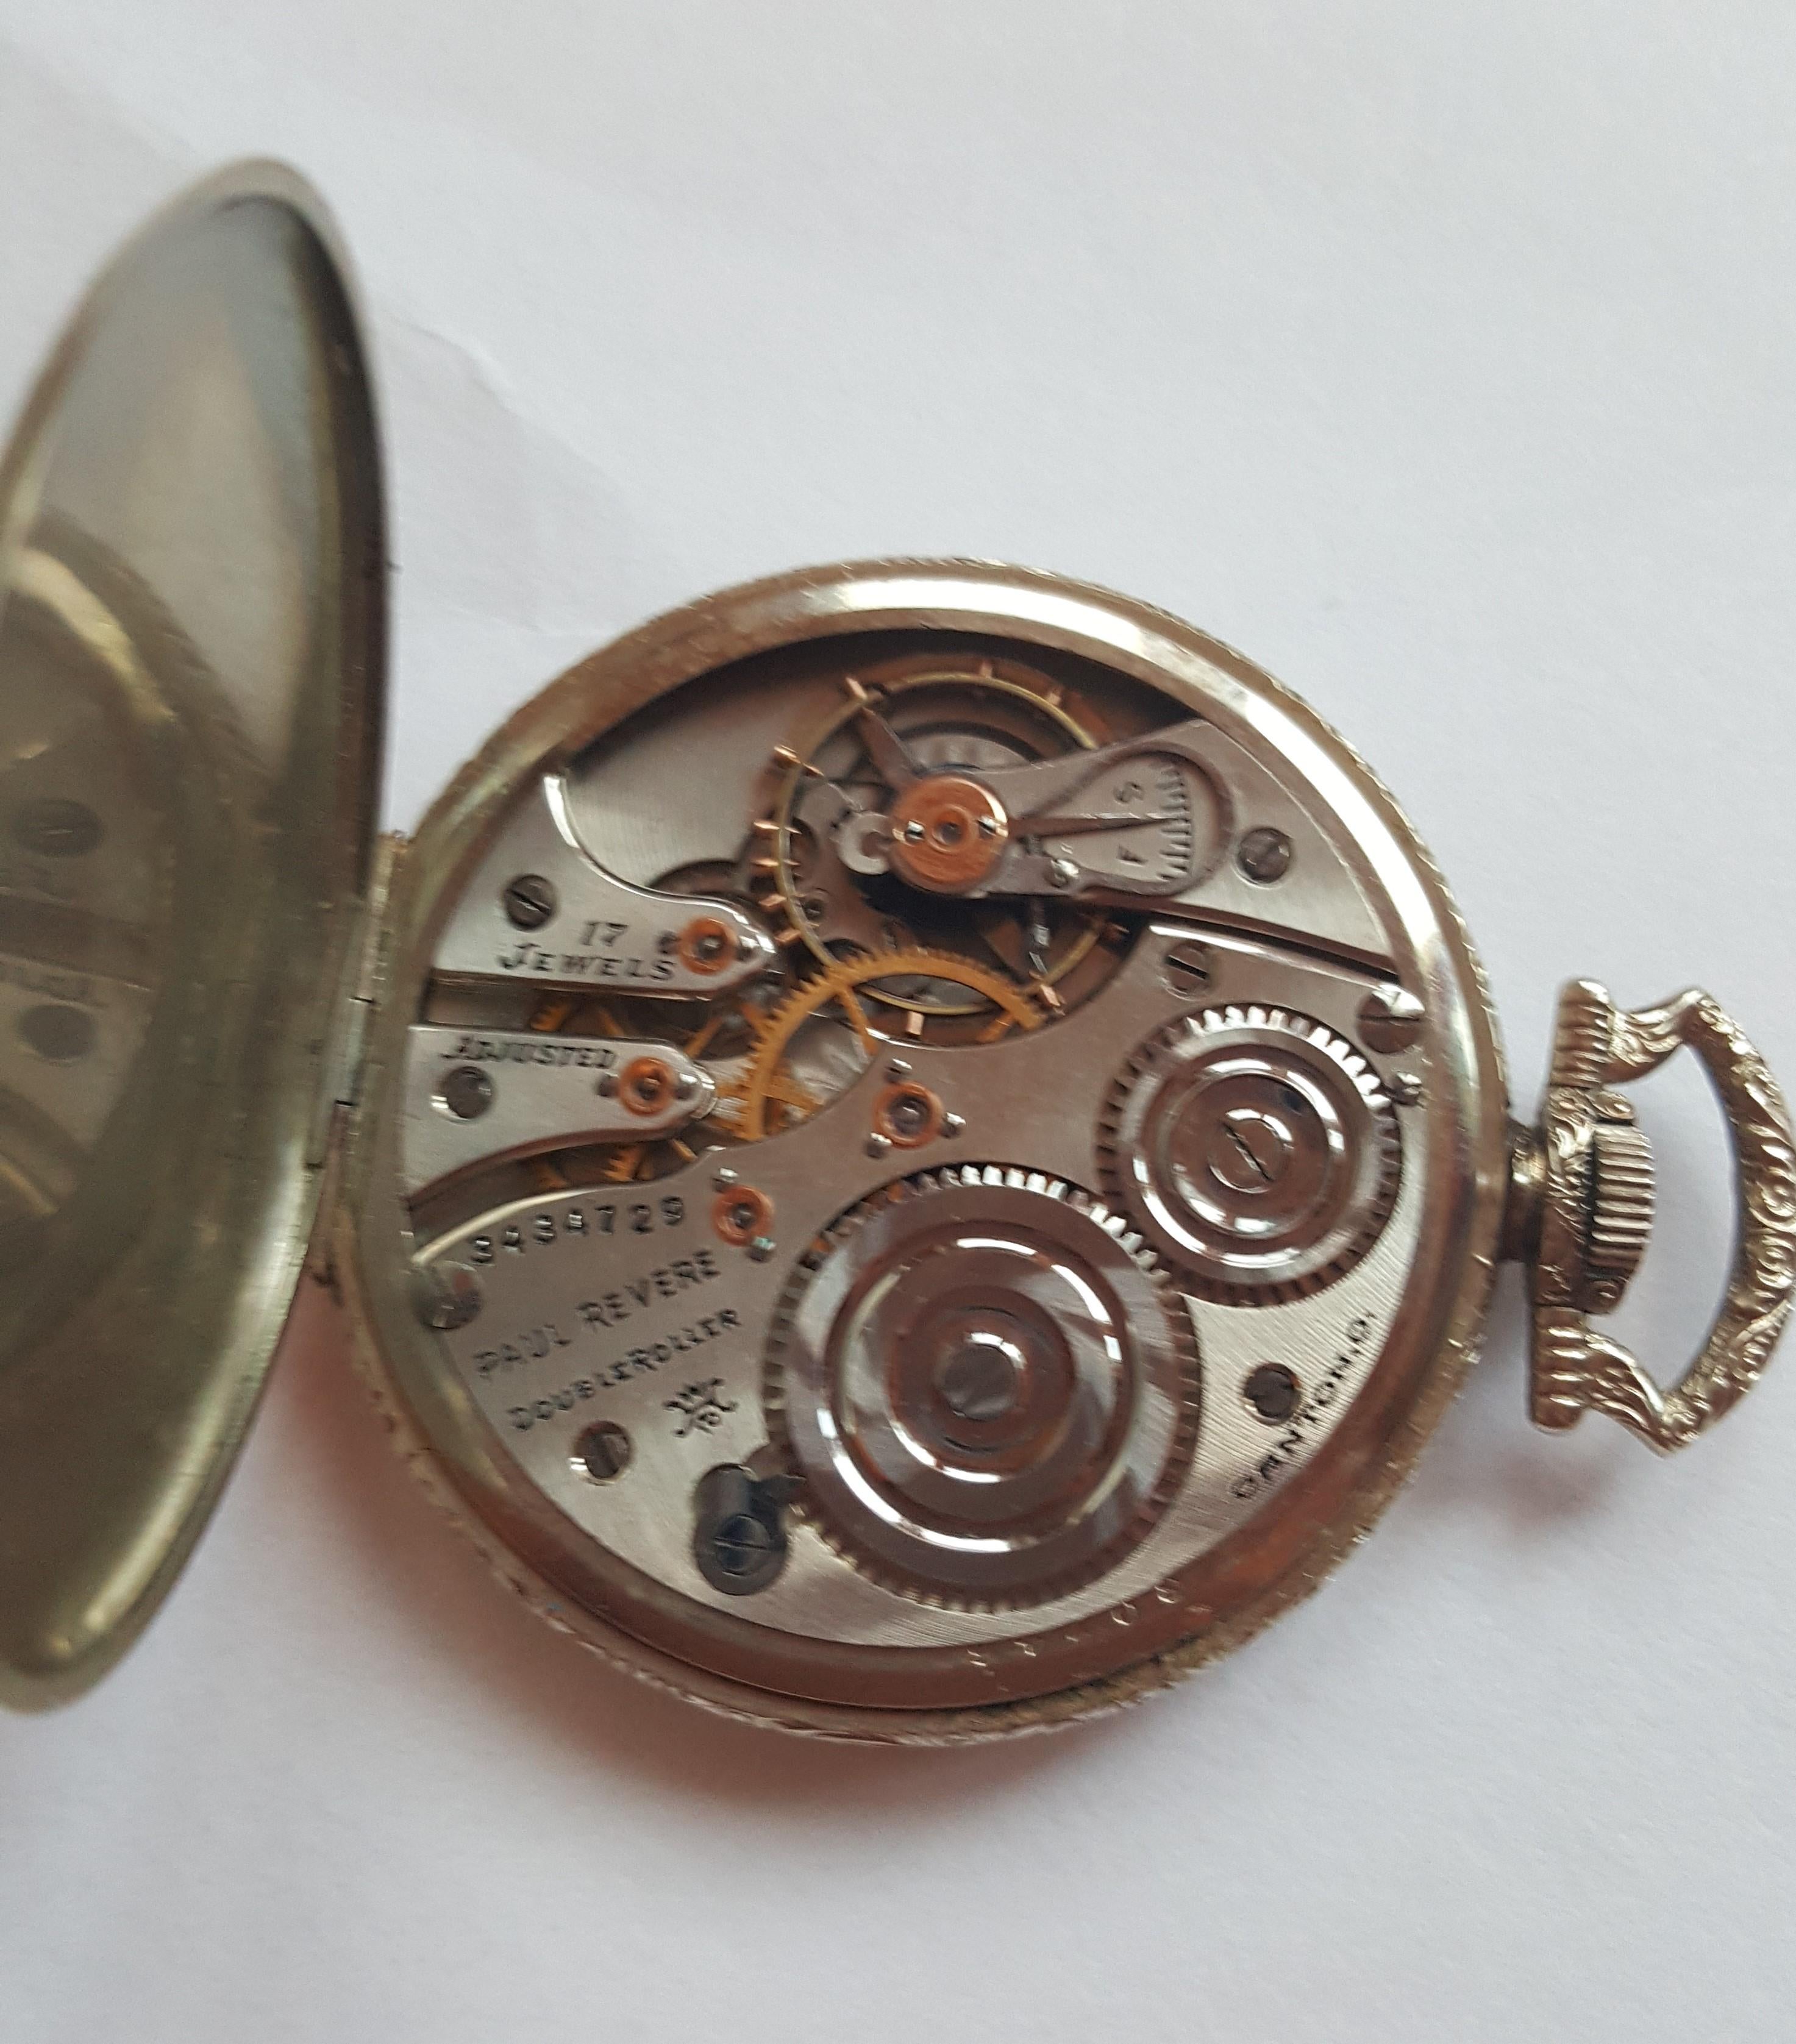 Vintage Hampden Pocket Watch 1916, 17 Jewel, Paul Revere, WORKING, 43mm Case, Silver, Chronograph, Excellent Condition, Gold Numerals. Beautiful Pocket watch

This watch has not been serviced with a complete clean and overhaul and it's sold as is.